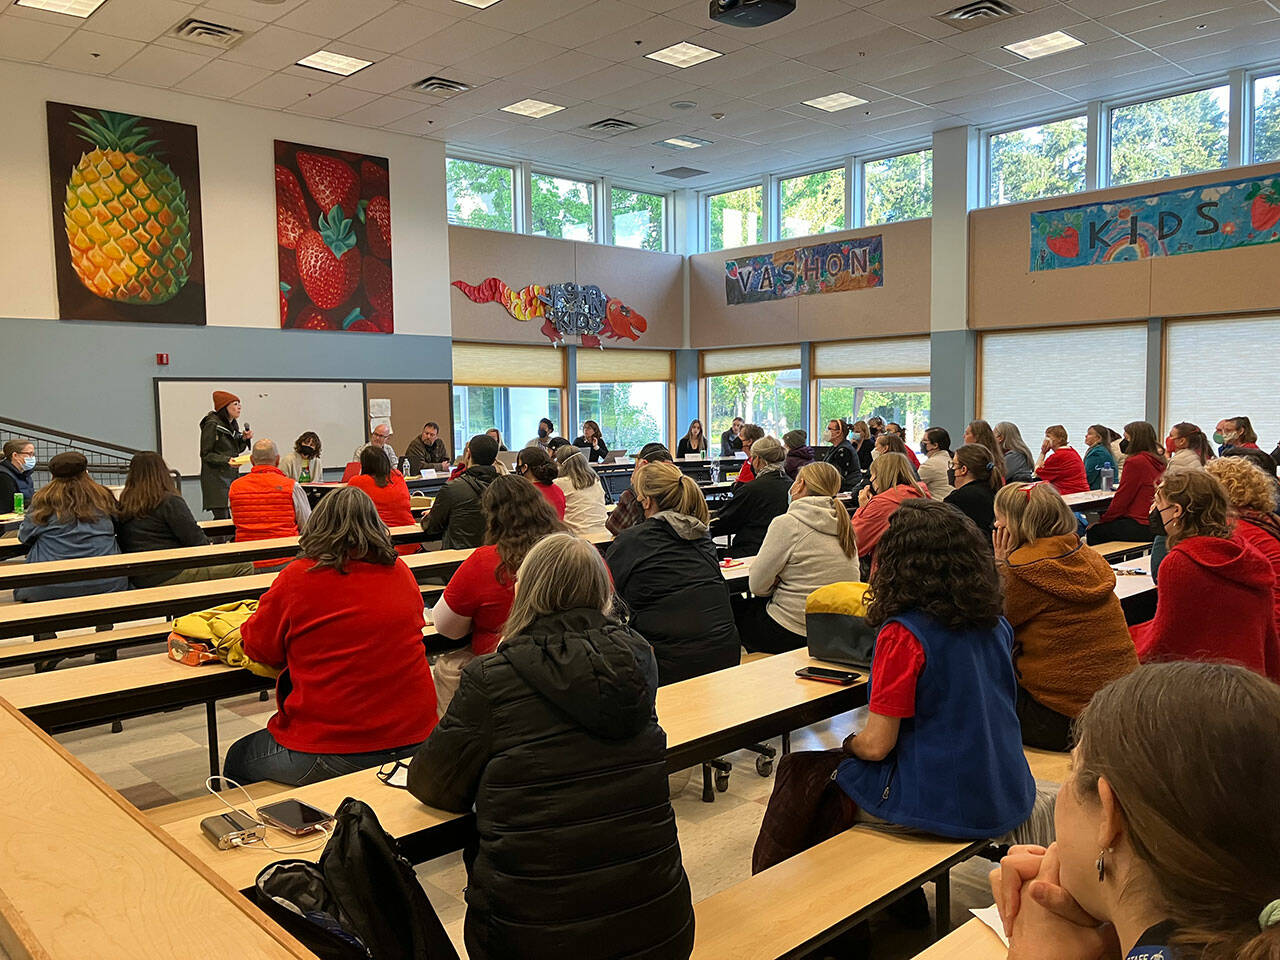 (Elizabeth Shepherd Photo) Approximately 80 members of the public attended a school board meeting on May 12, during which the board approved a package of staff cuts intended to restore $917,000 to the district’s 2022-2023 budget.